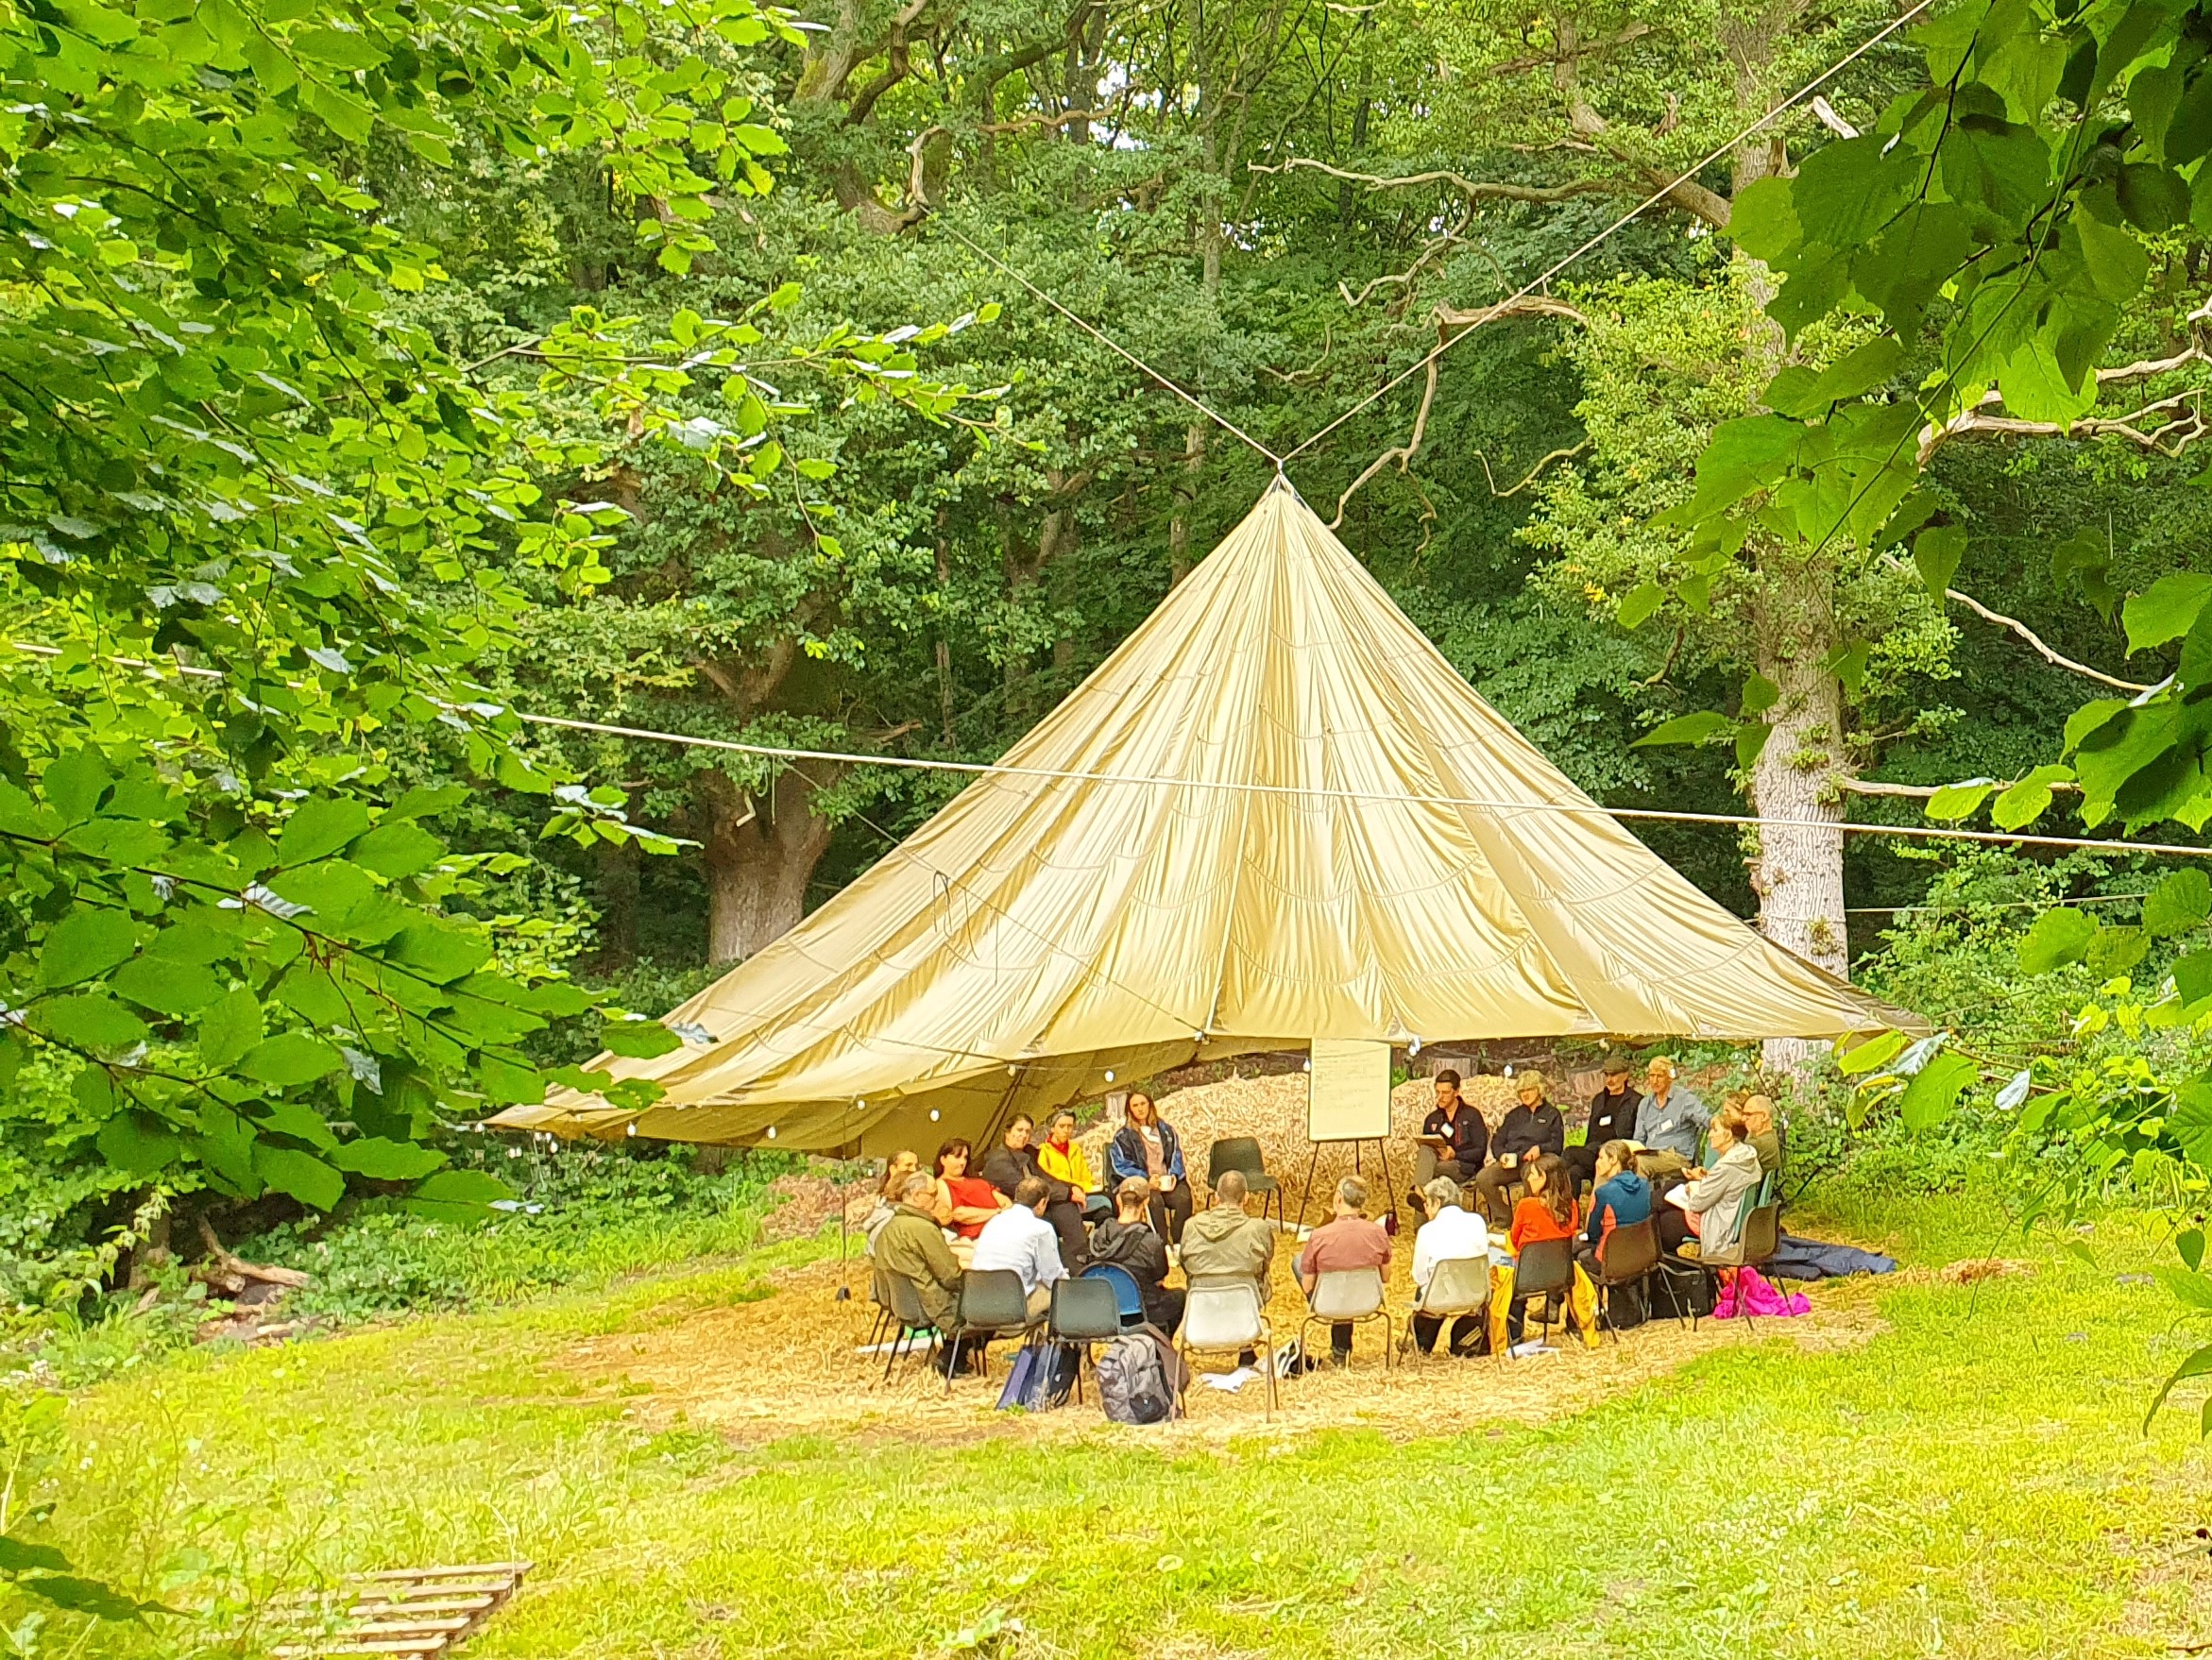 A group of people sitting under a tent in Wytham Woods